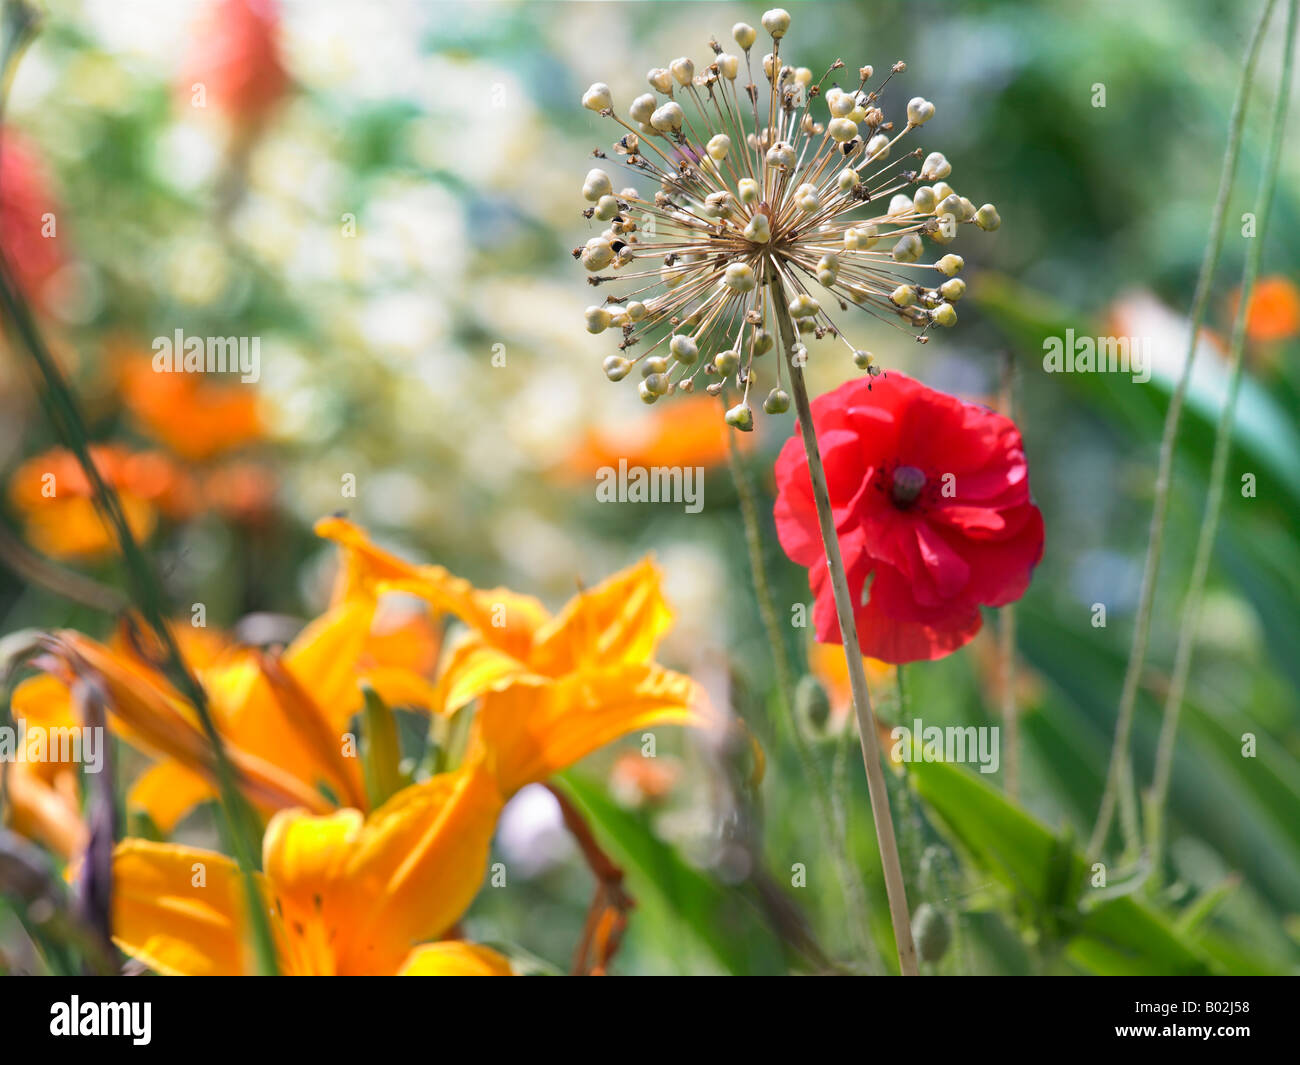 A close up of flowers growing in a garden setting Stock Photo